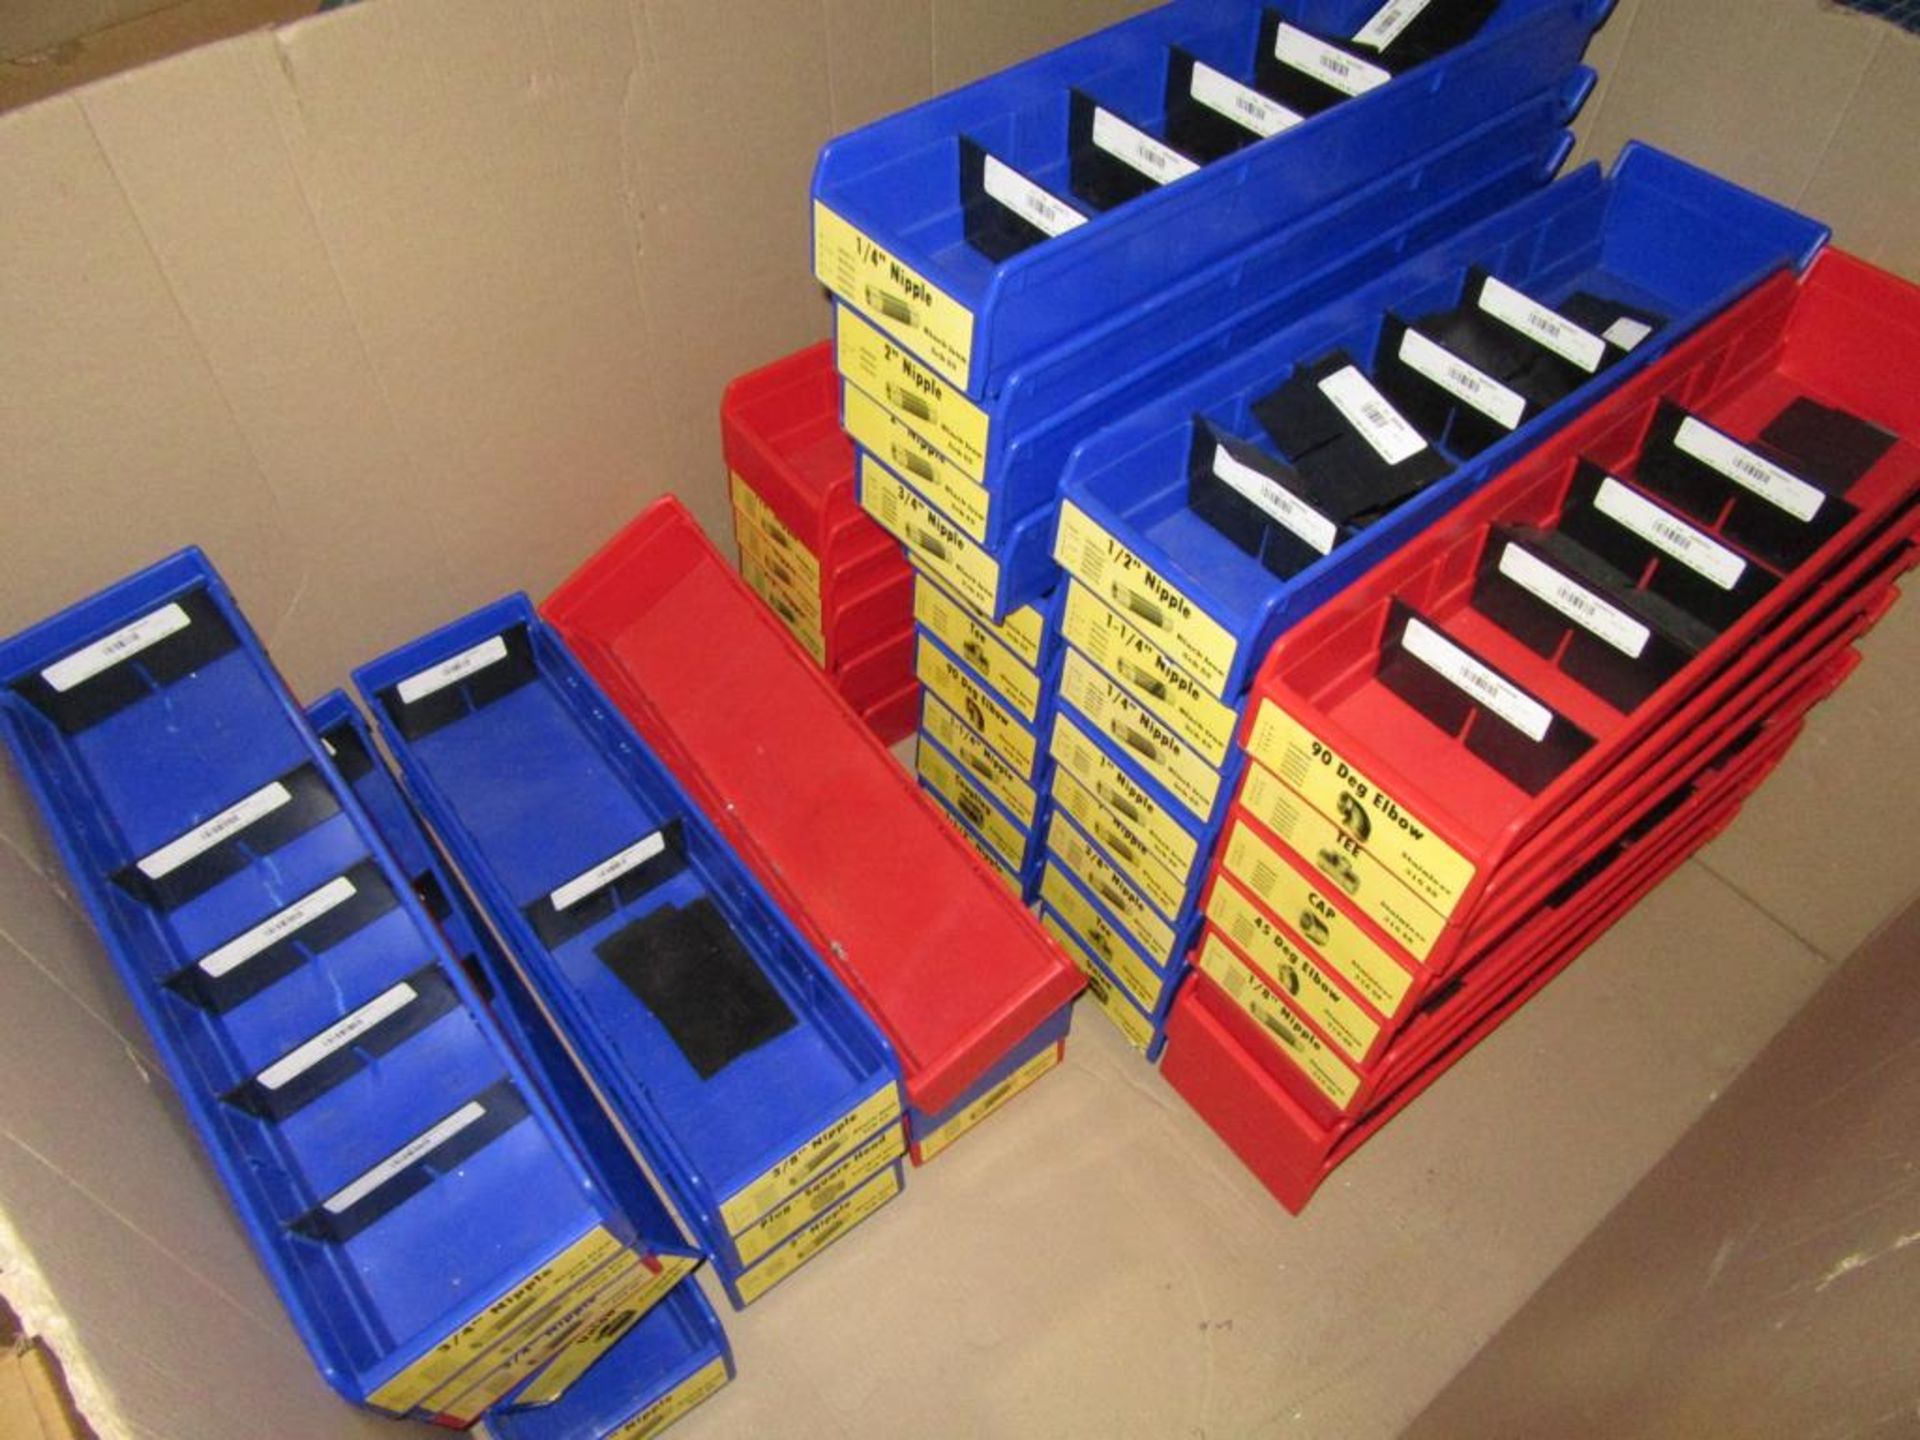 Parts Bins; Lot: Assorted Plastic Parts Bins in (1) Gaylord Box. HIT# 2217582. Loc: Maintenance - Image 2 of 2